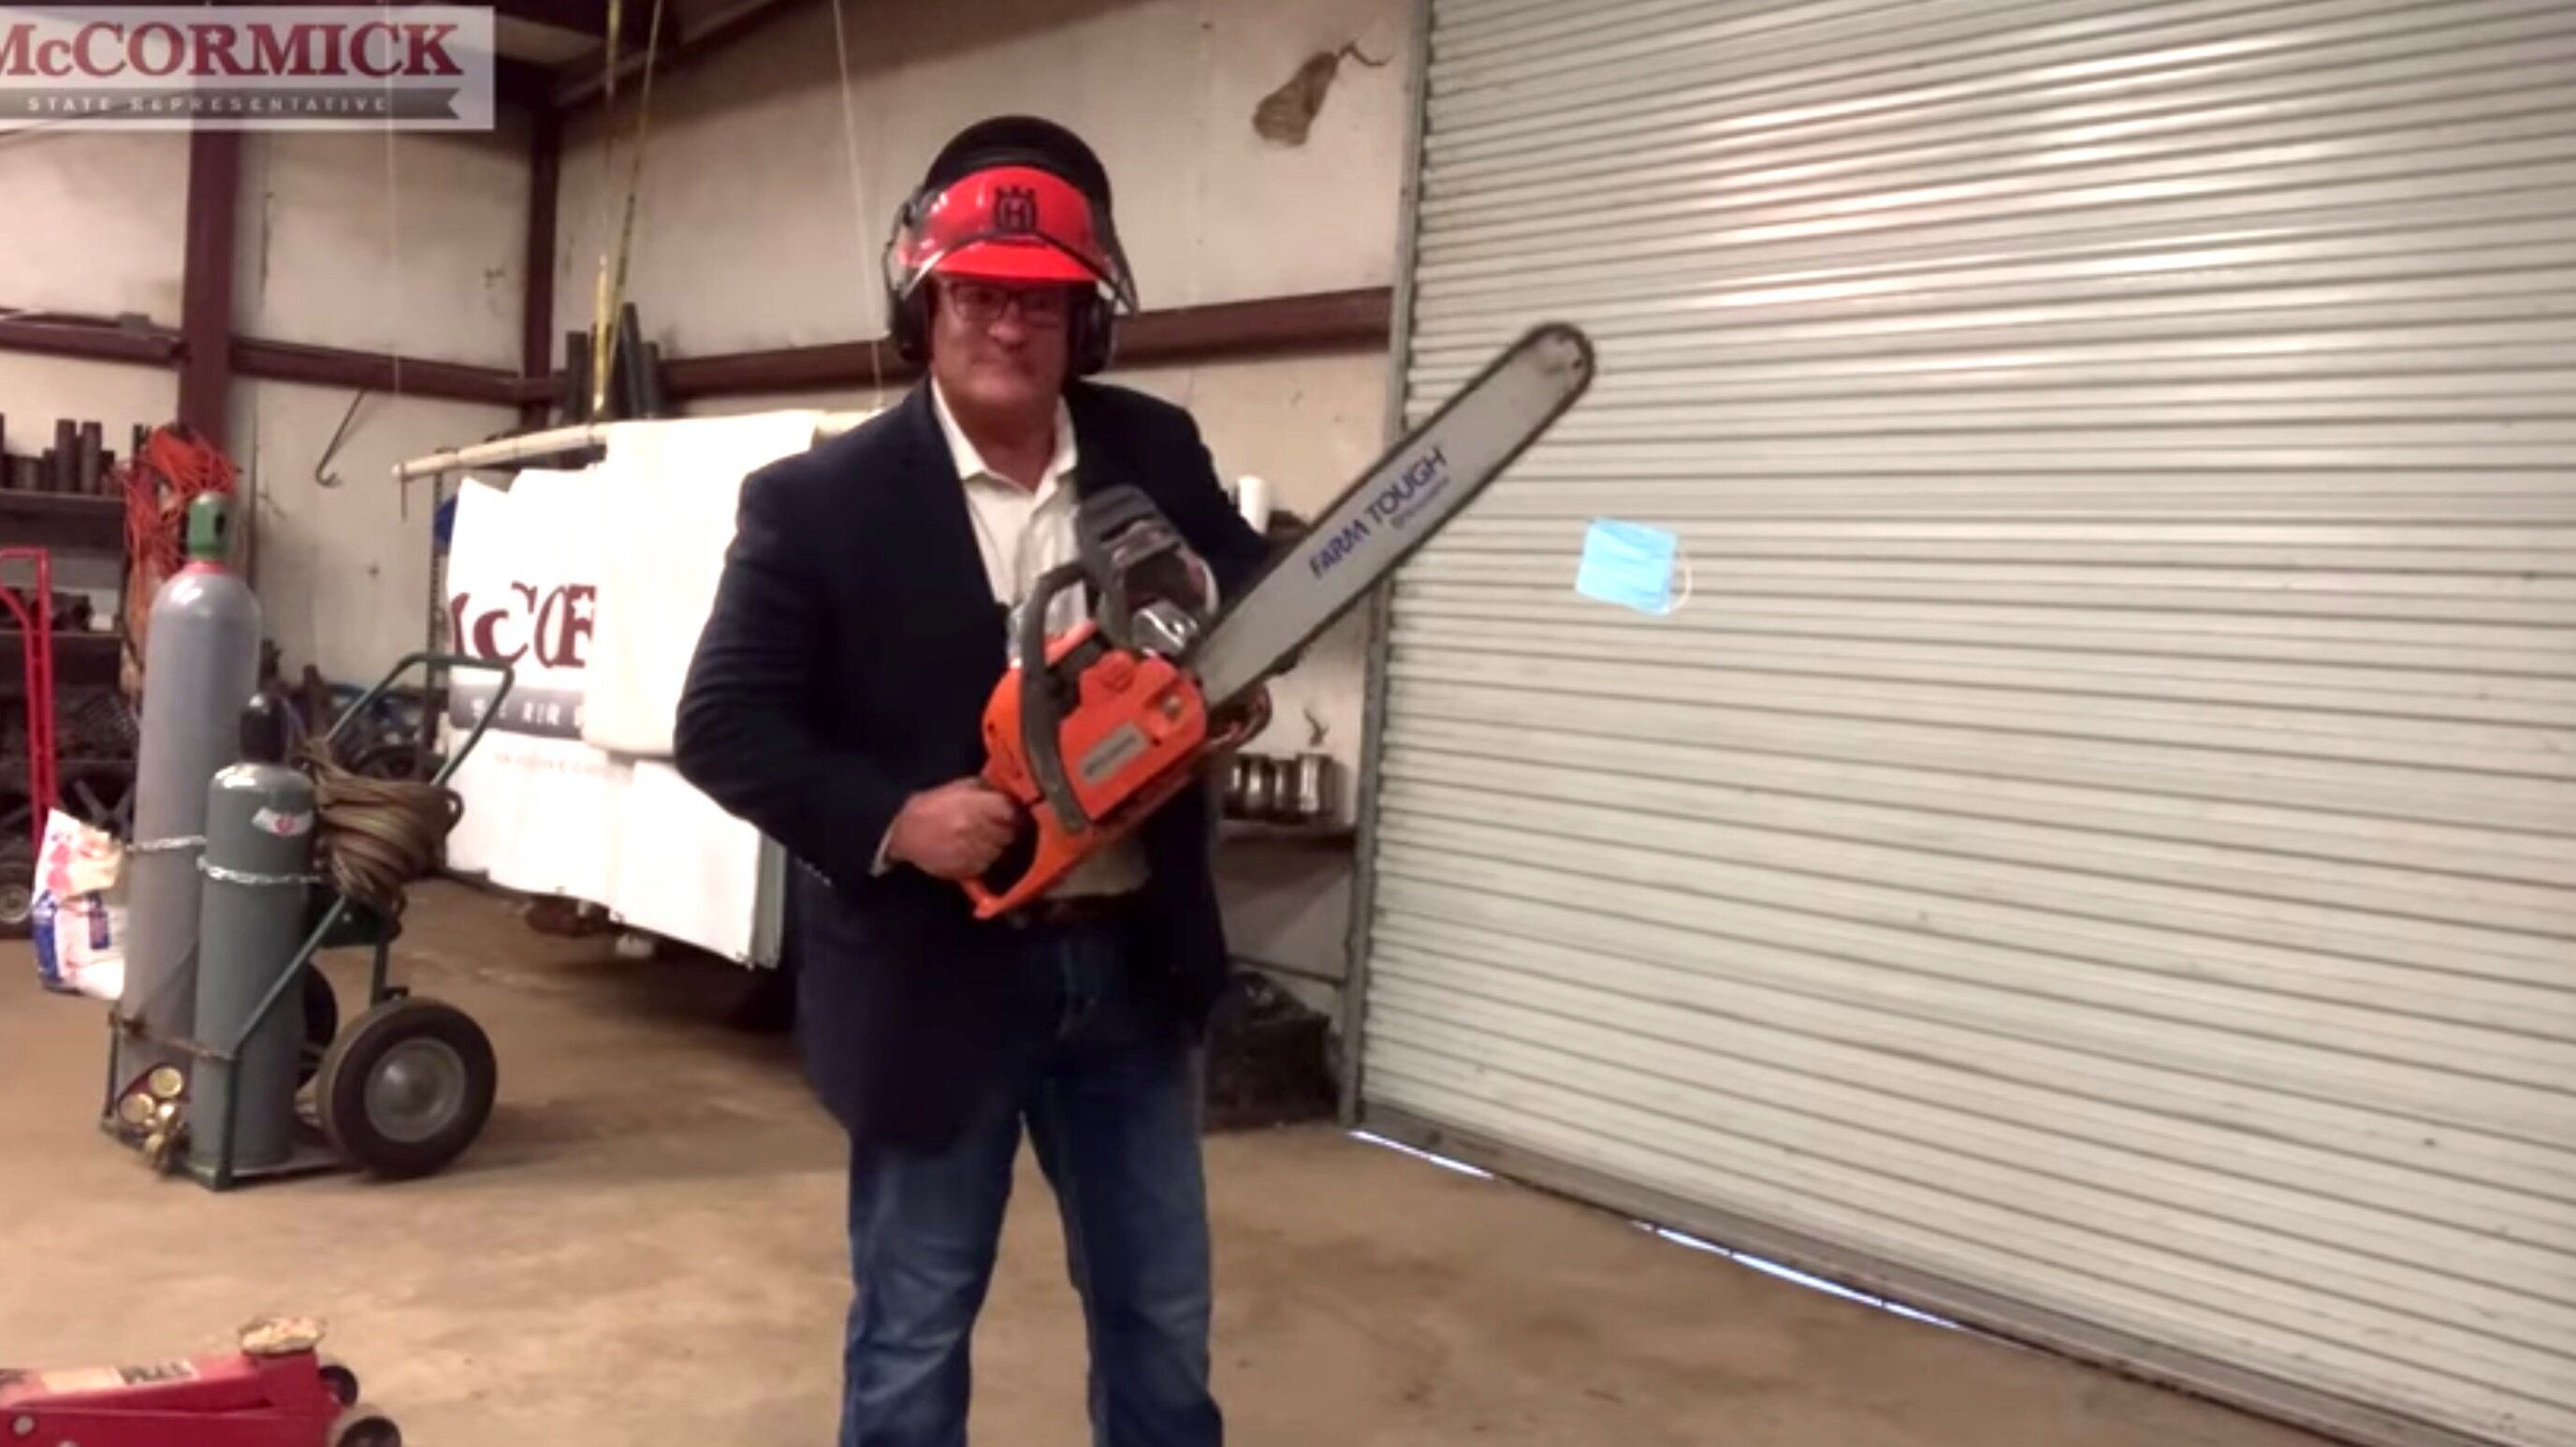 GOP Rep. Becomes Weirdly Violent With Mask, Rants About Nazis In Bonkers Video